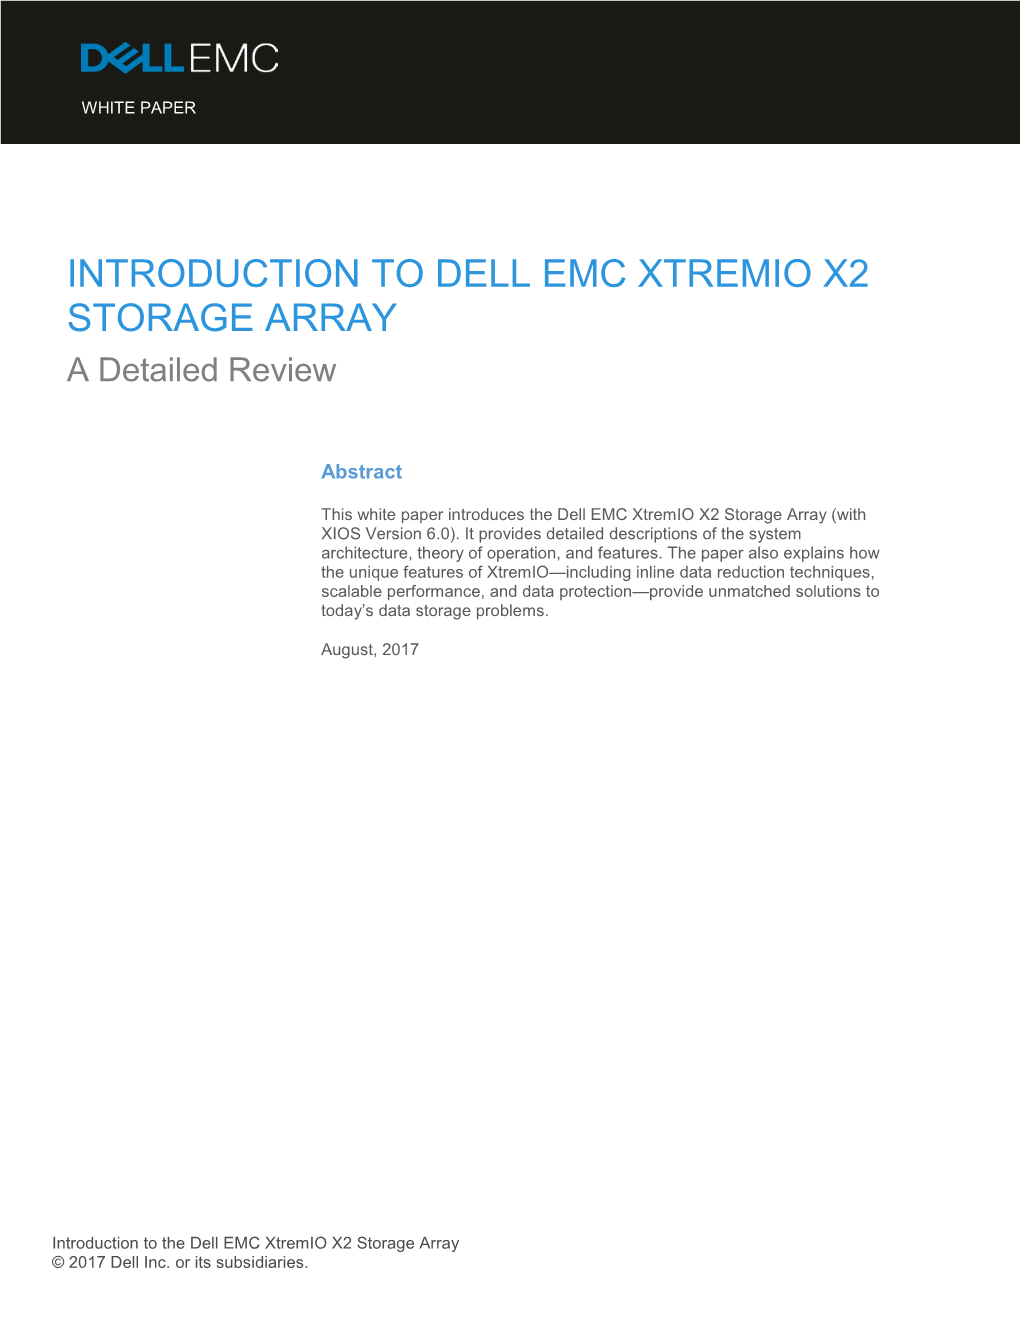 INTRODUCTION to DELL EMC XTREMIO X2 STORAGE ARRAY a Detailed Review